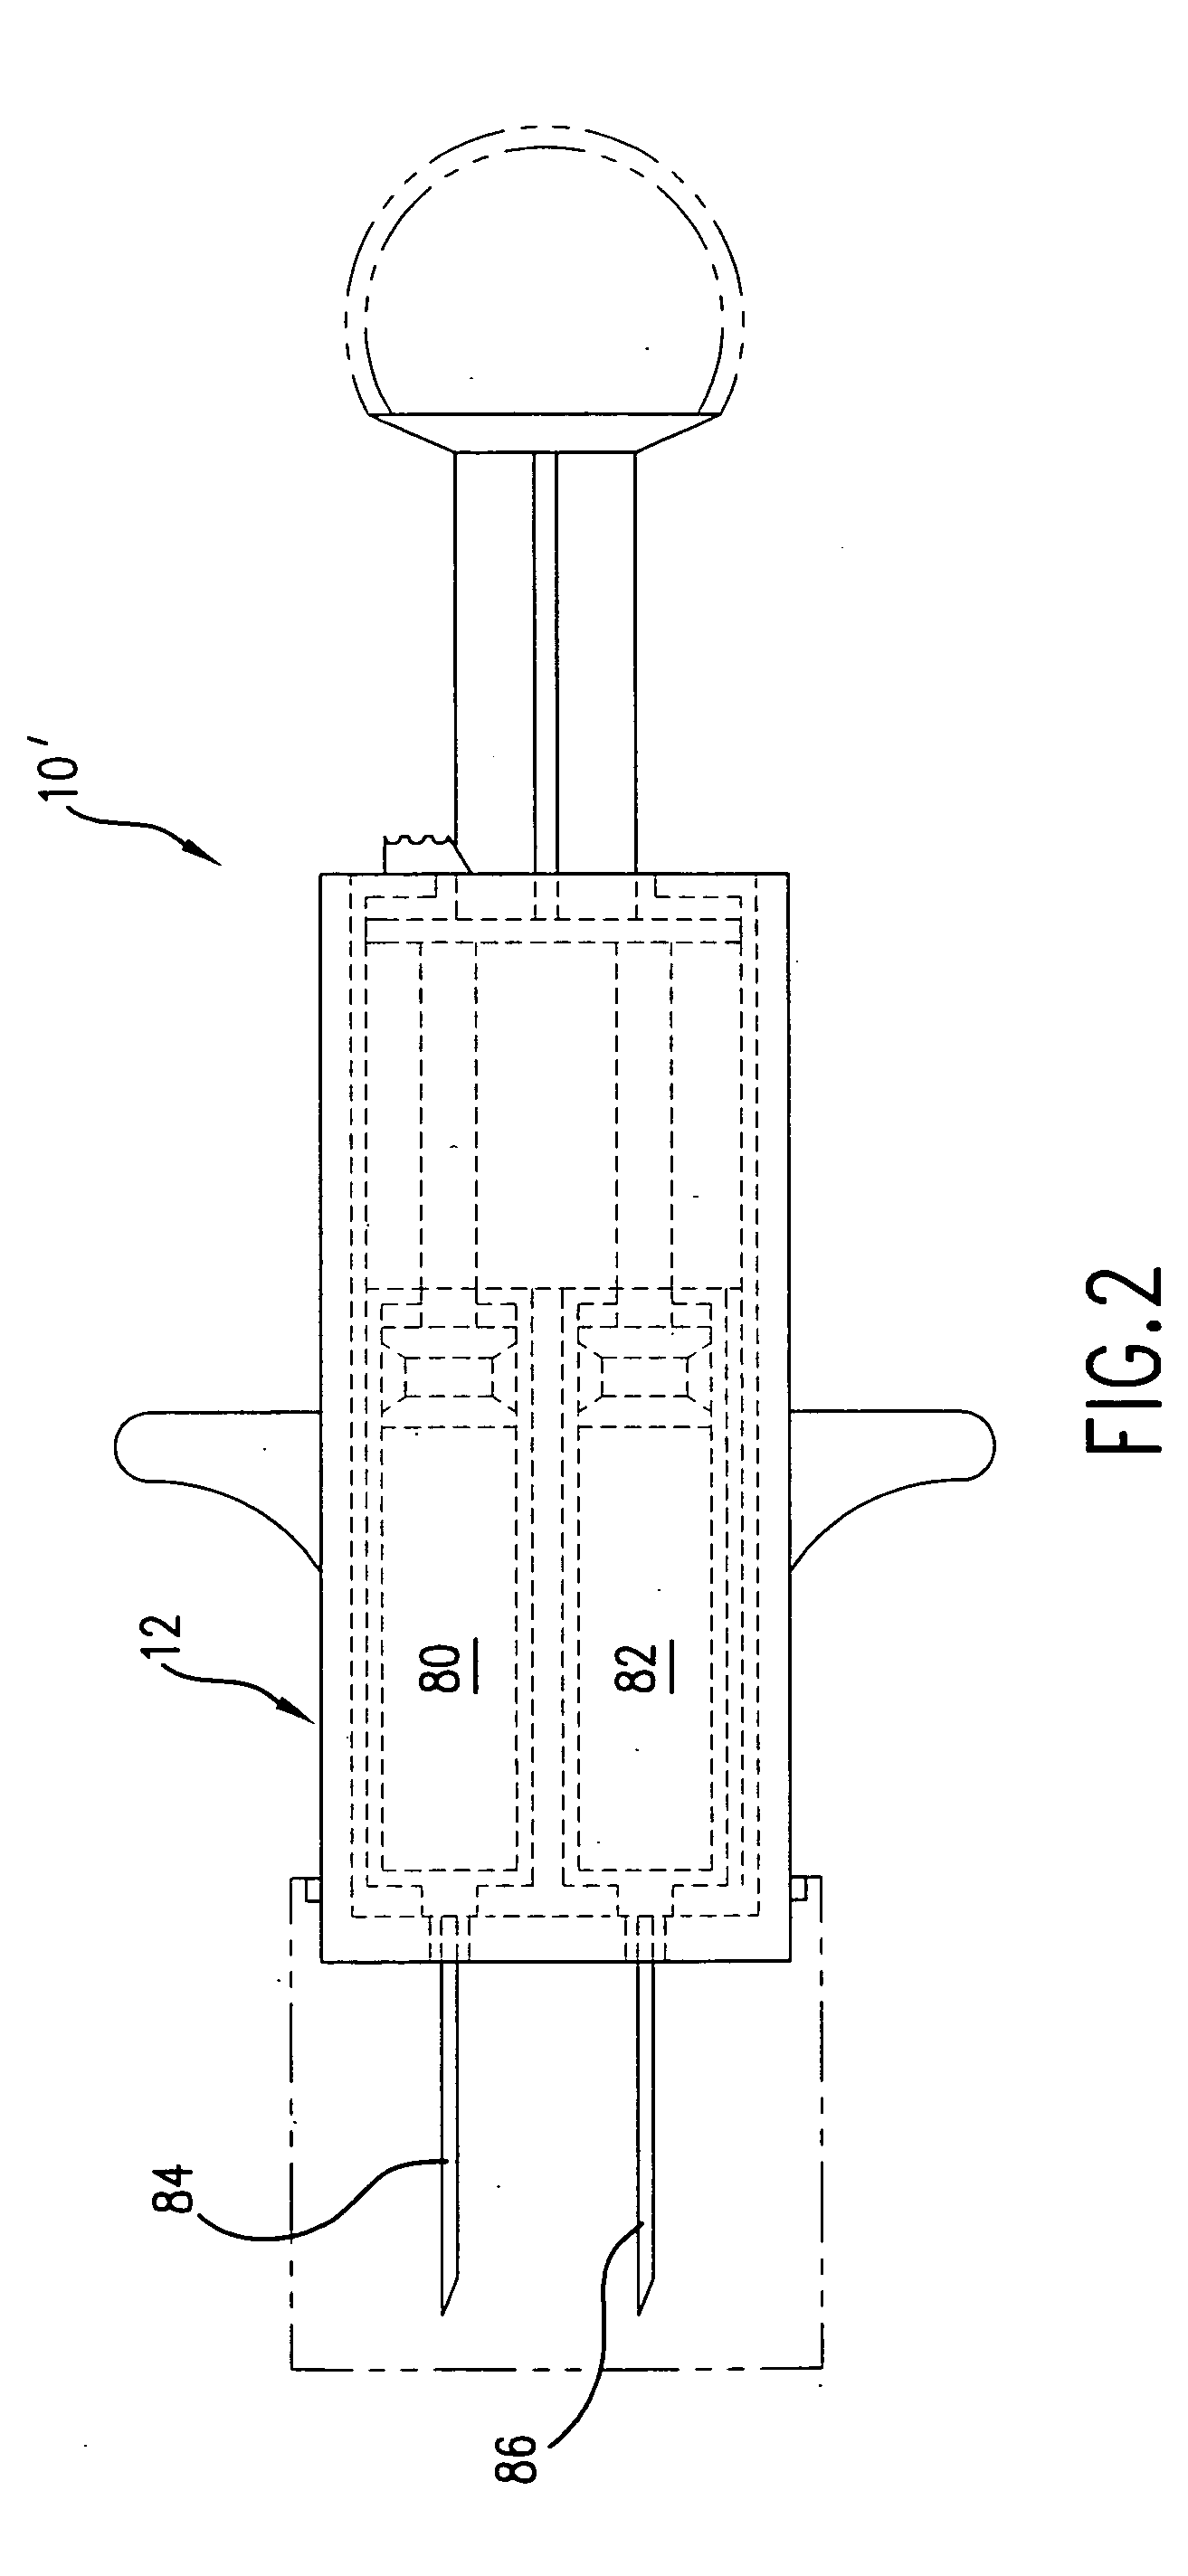 Hypodermic syringes with multiple needles and methods of calming psychiatric patients using such